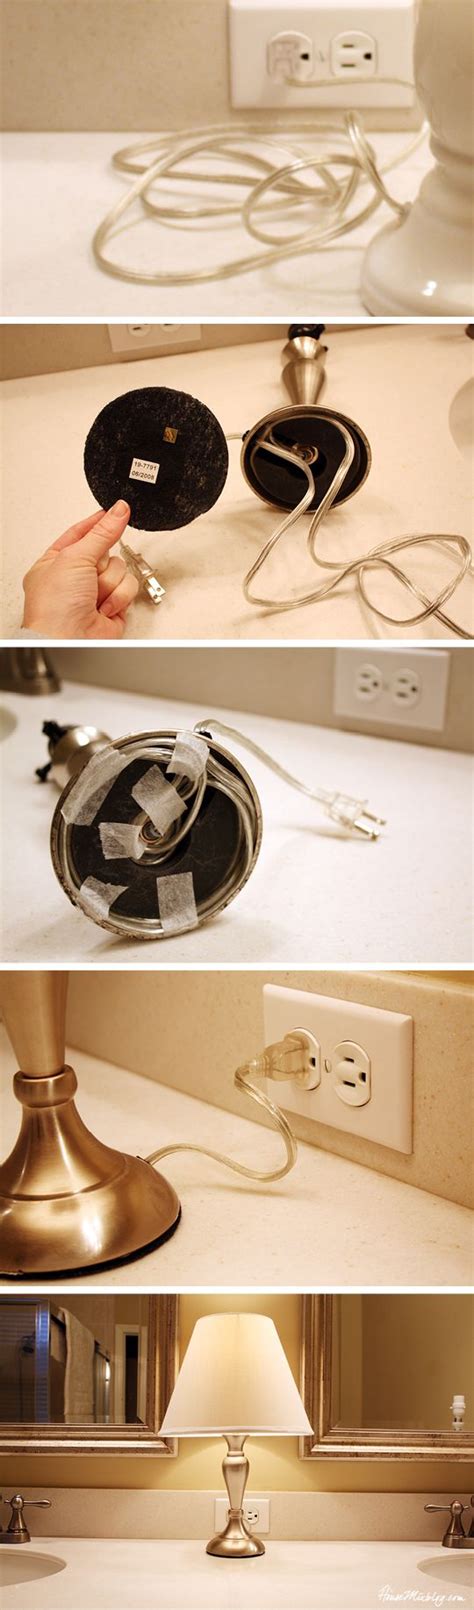 How To Shorten A Lamp Cord Lamp Cord White Ceramic Lamps Small Lamp